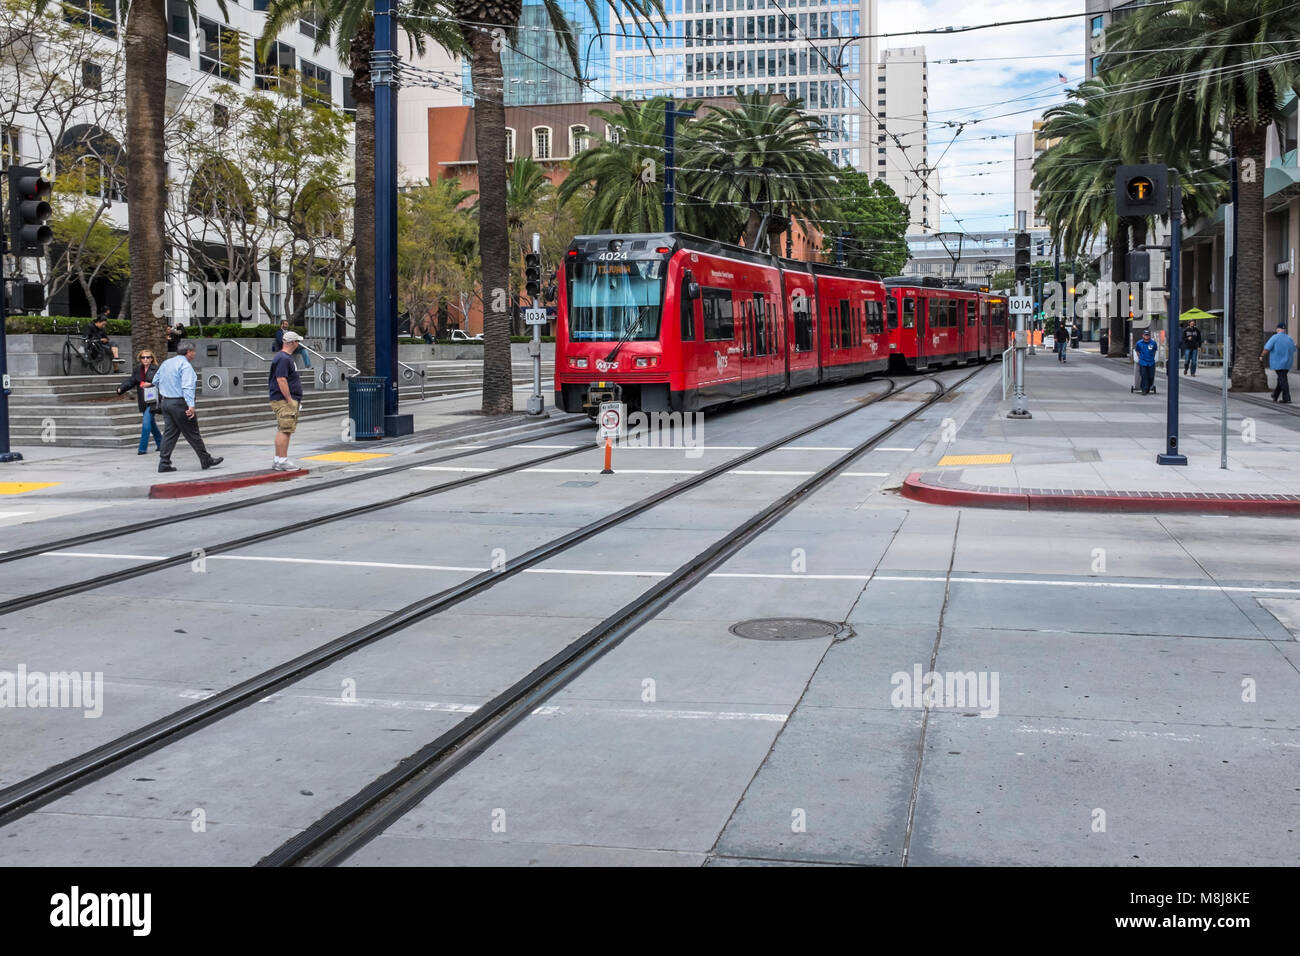 SAN DIEGO, CALIFORNIA, USA - Red Trolley train of the San Diego Metropolitan Transit System in the Downtown sector of the city. Stock Photo